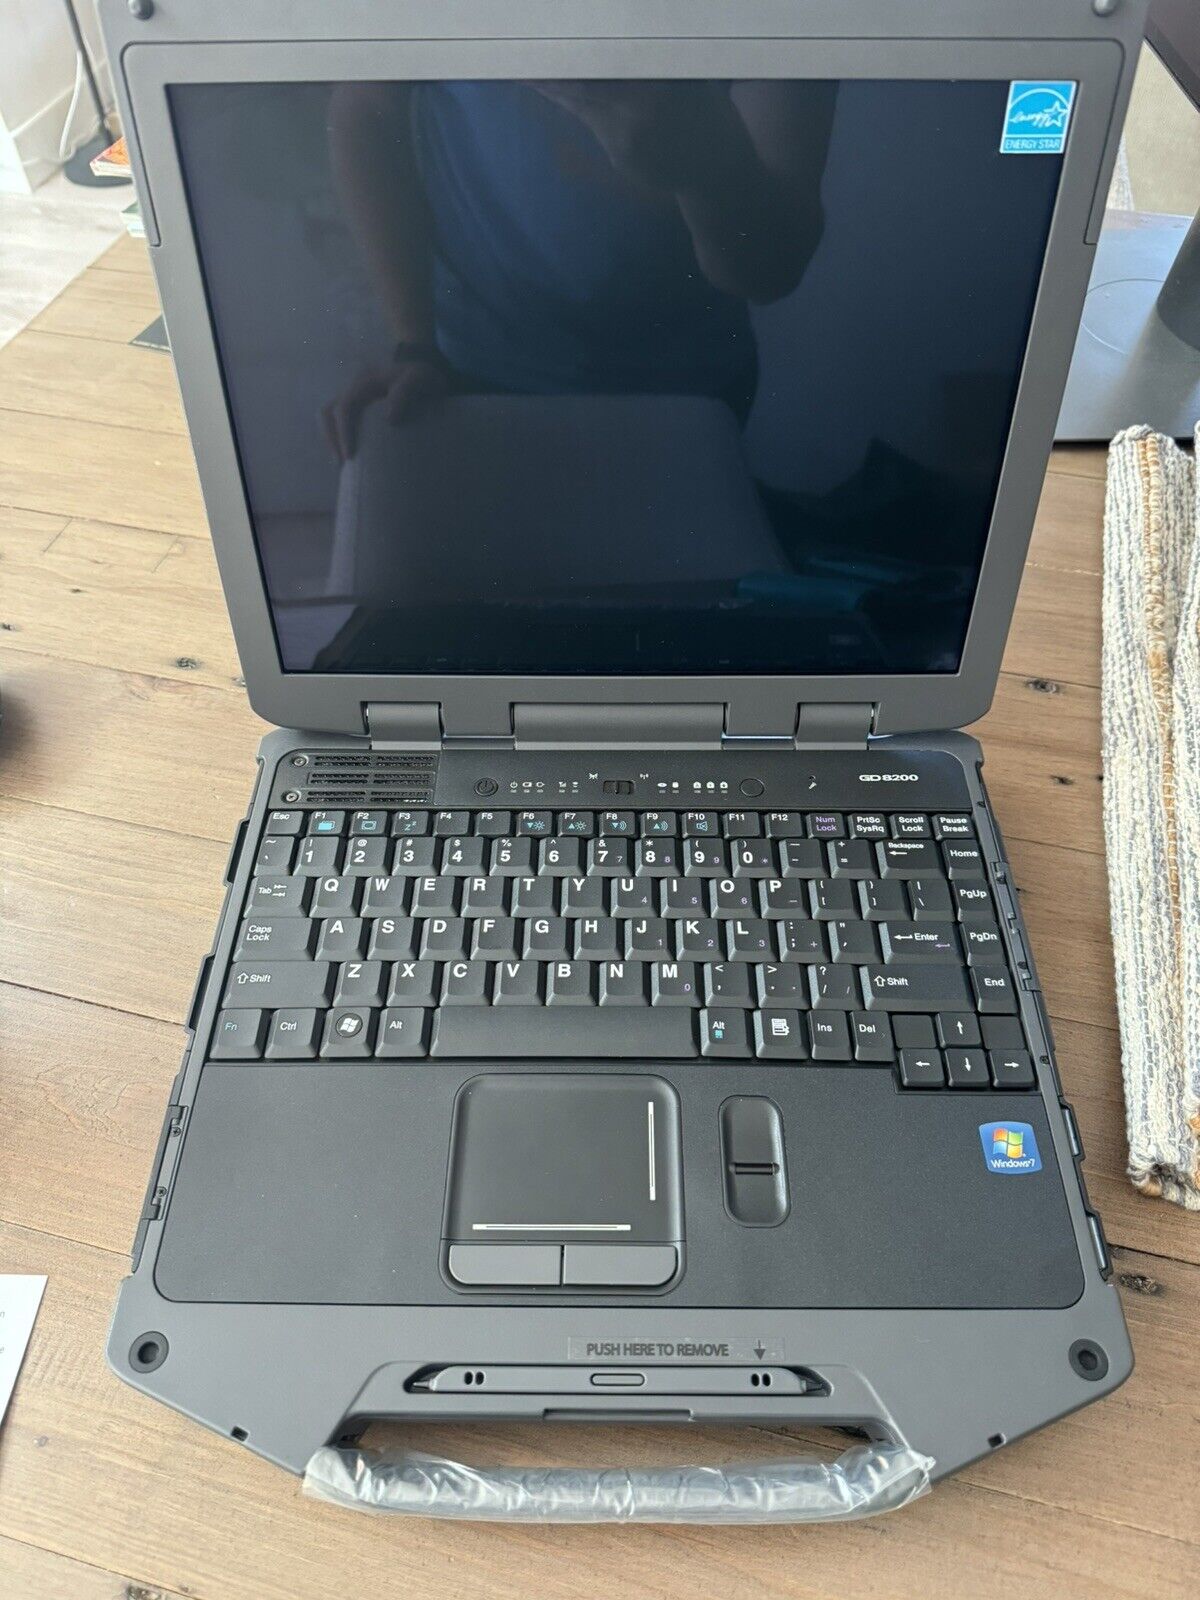 General Dynamics GD8200 Rugged Military Laptop - NEW IN BOX